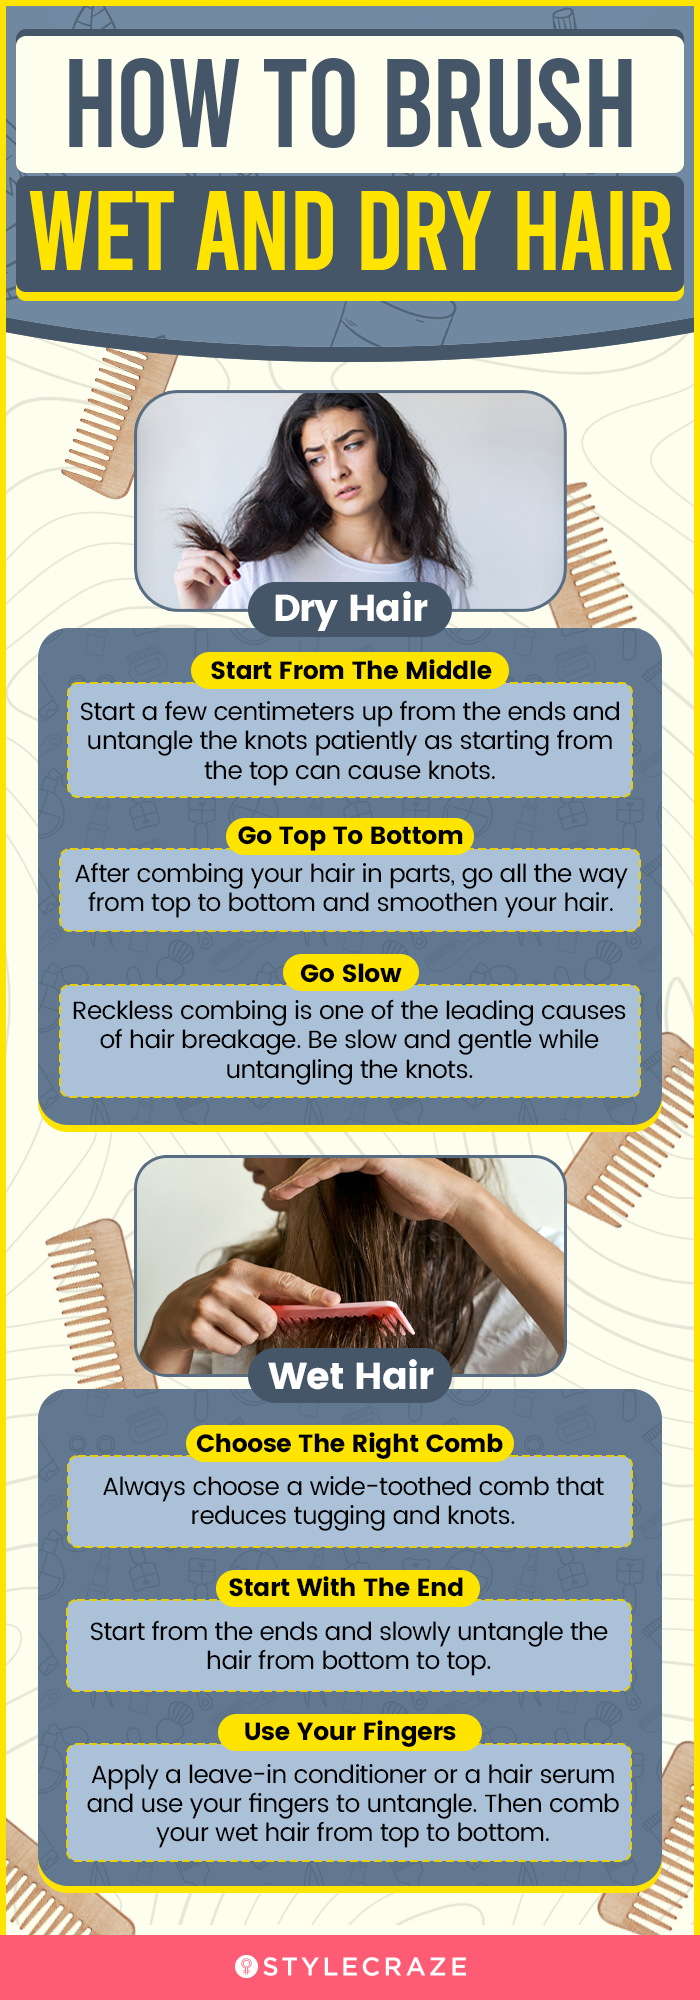 How To Brush Wet And Dry Hair (infographic)